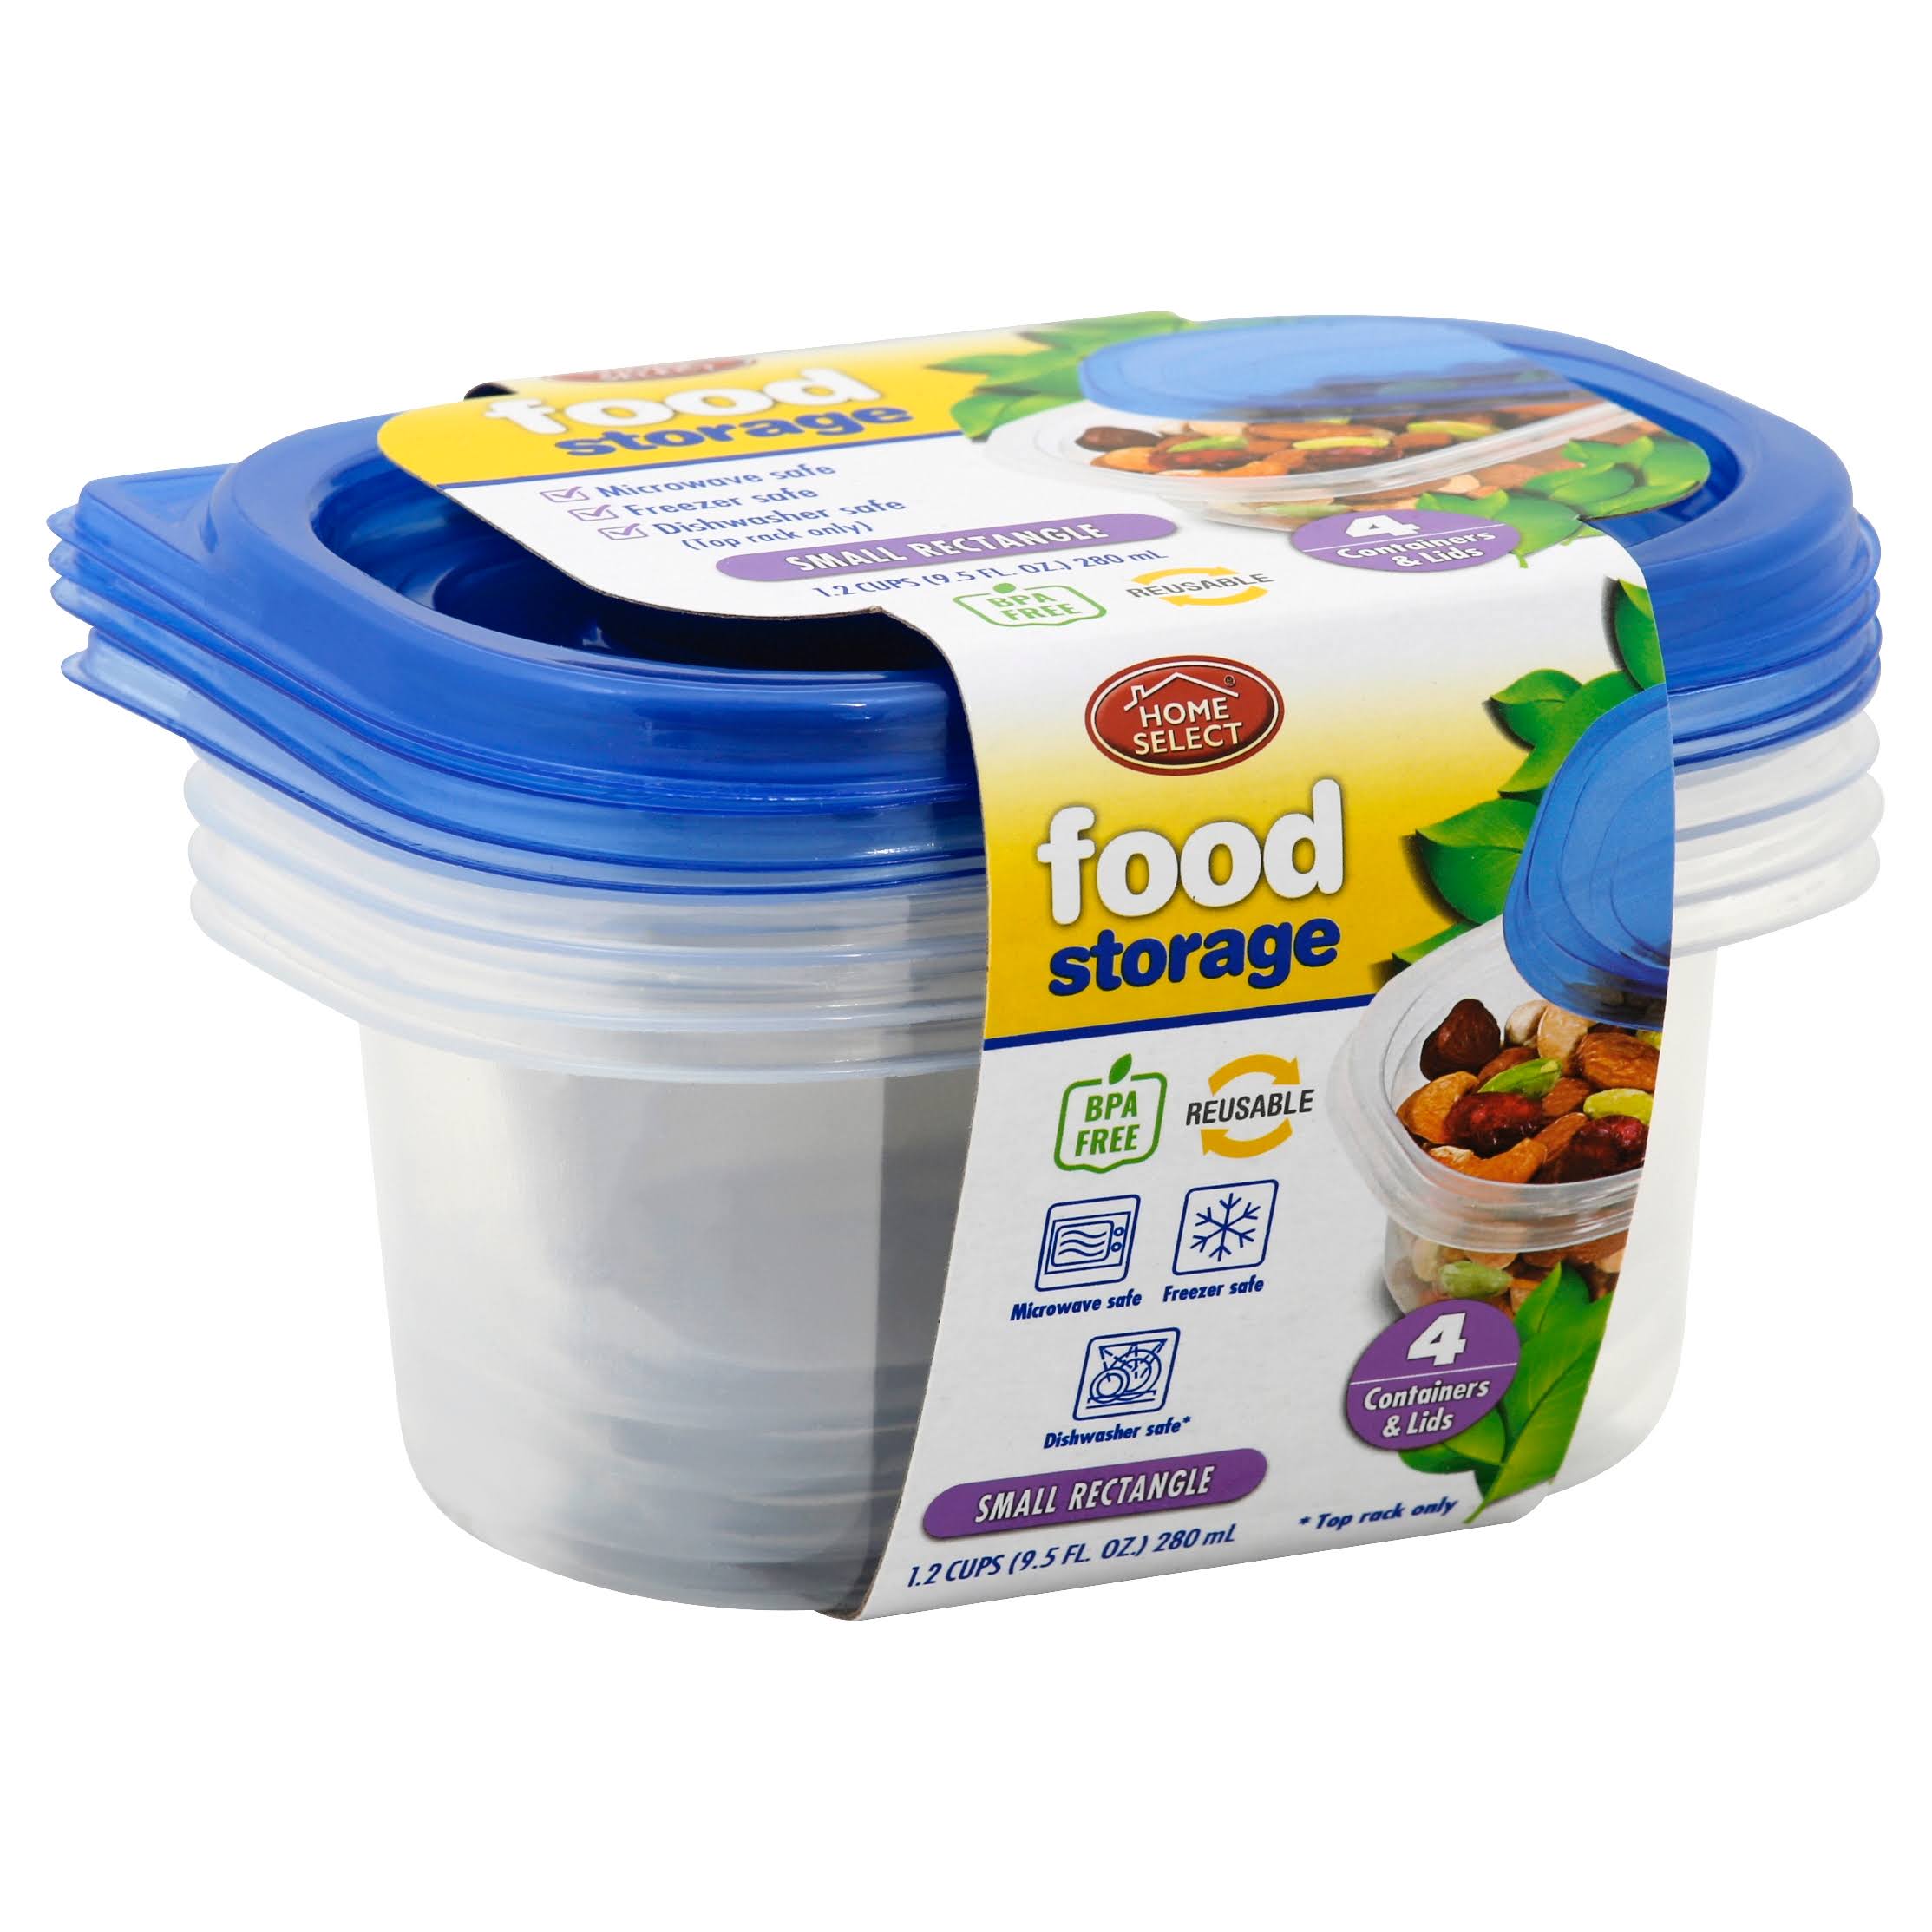 Home Select Food Storage, Small Rectangle, 1.2 Cups - 4 containers & lids